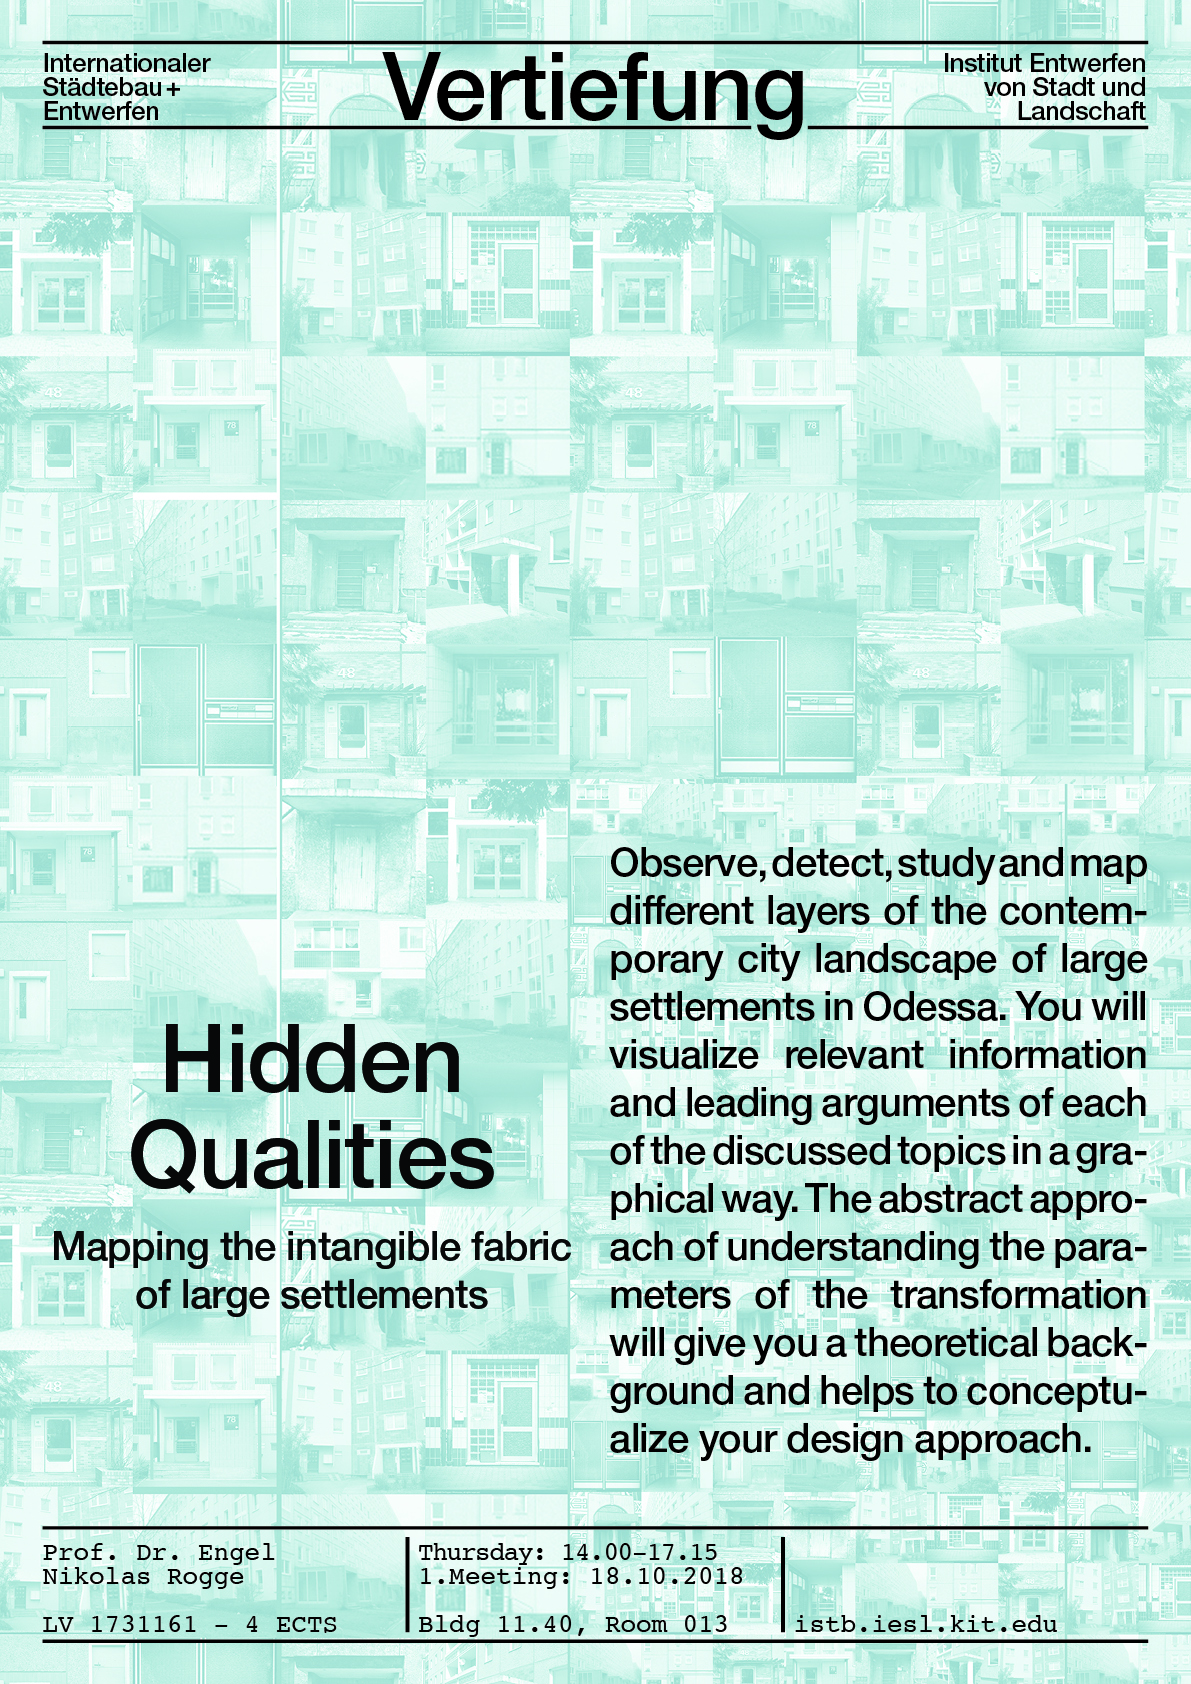 Vertiefung: Hidden Qualities - Mapping the intangible fabric of large settlements